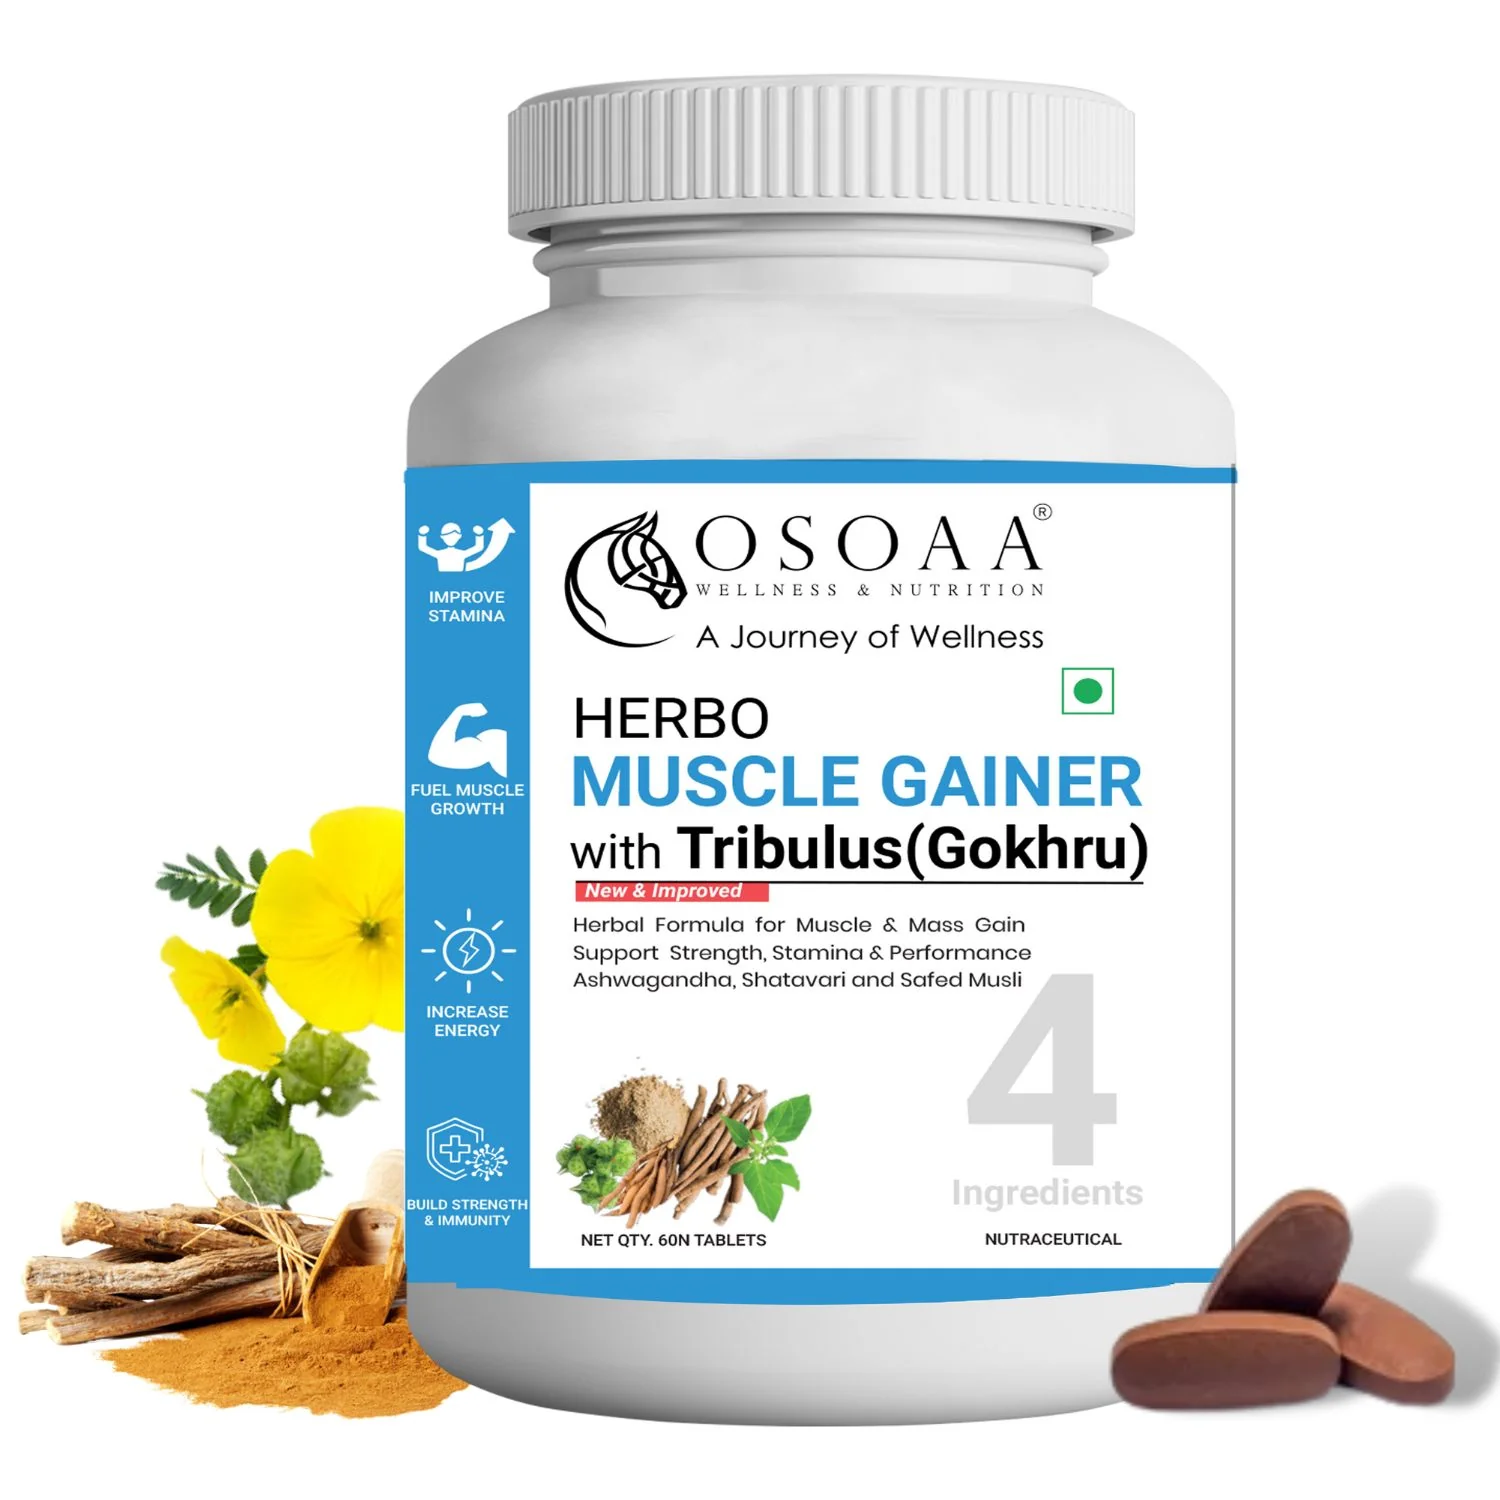 Osoaa Herbo Muscle Gainer With Tribulus 60 Tabs for Men| 100% Herbal Muscle Mass Gain Supplement | Improves Energy, Stamina & Focus